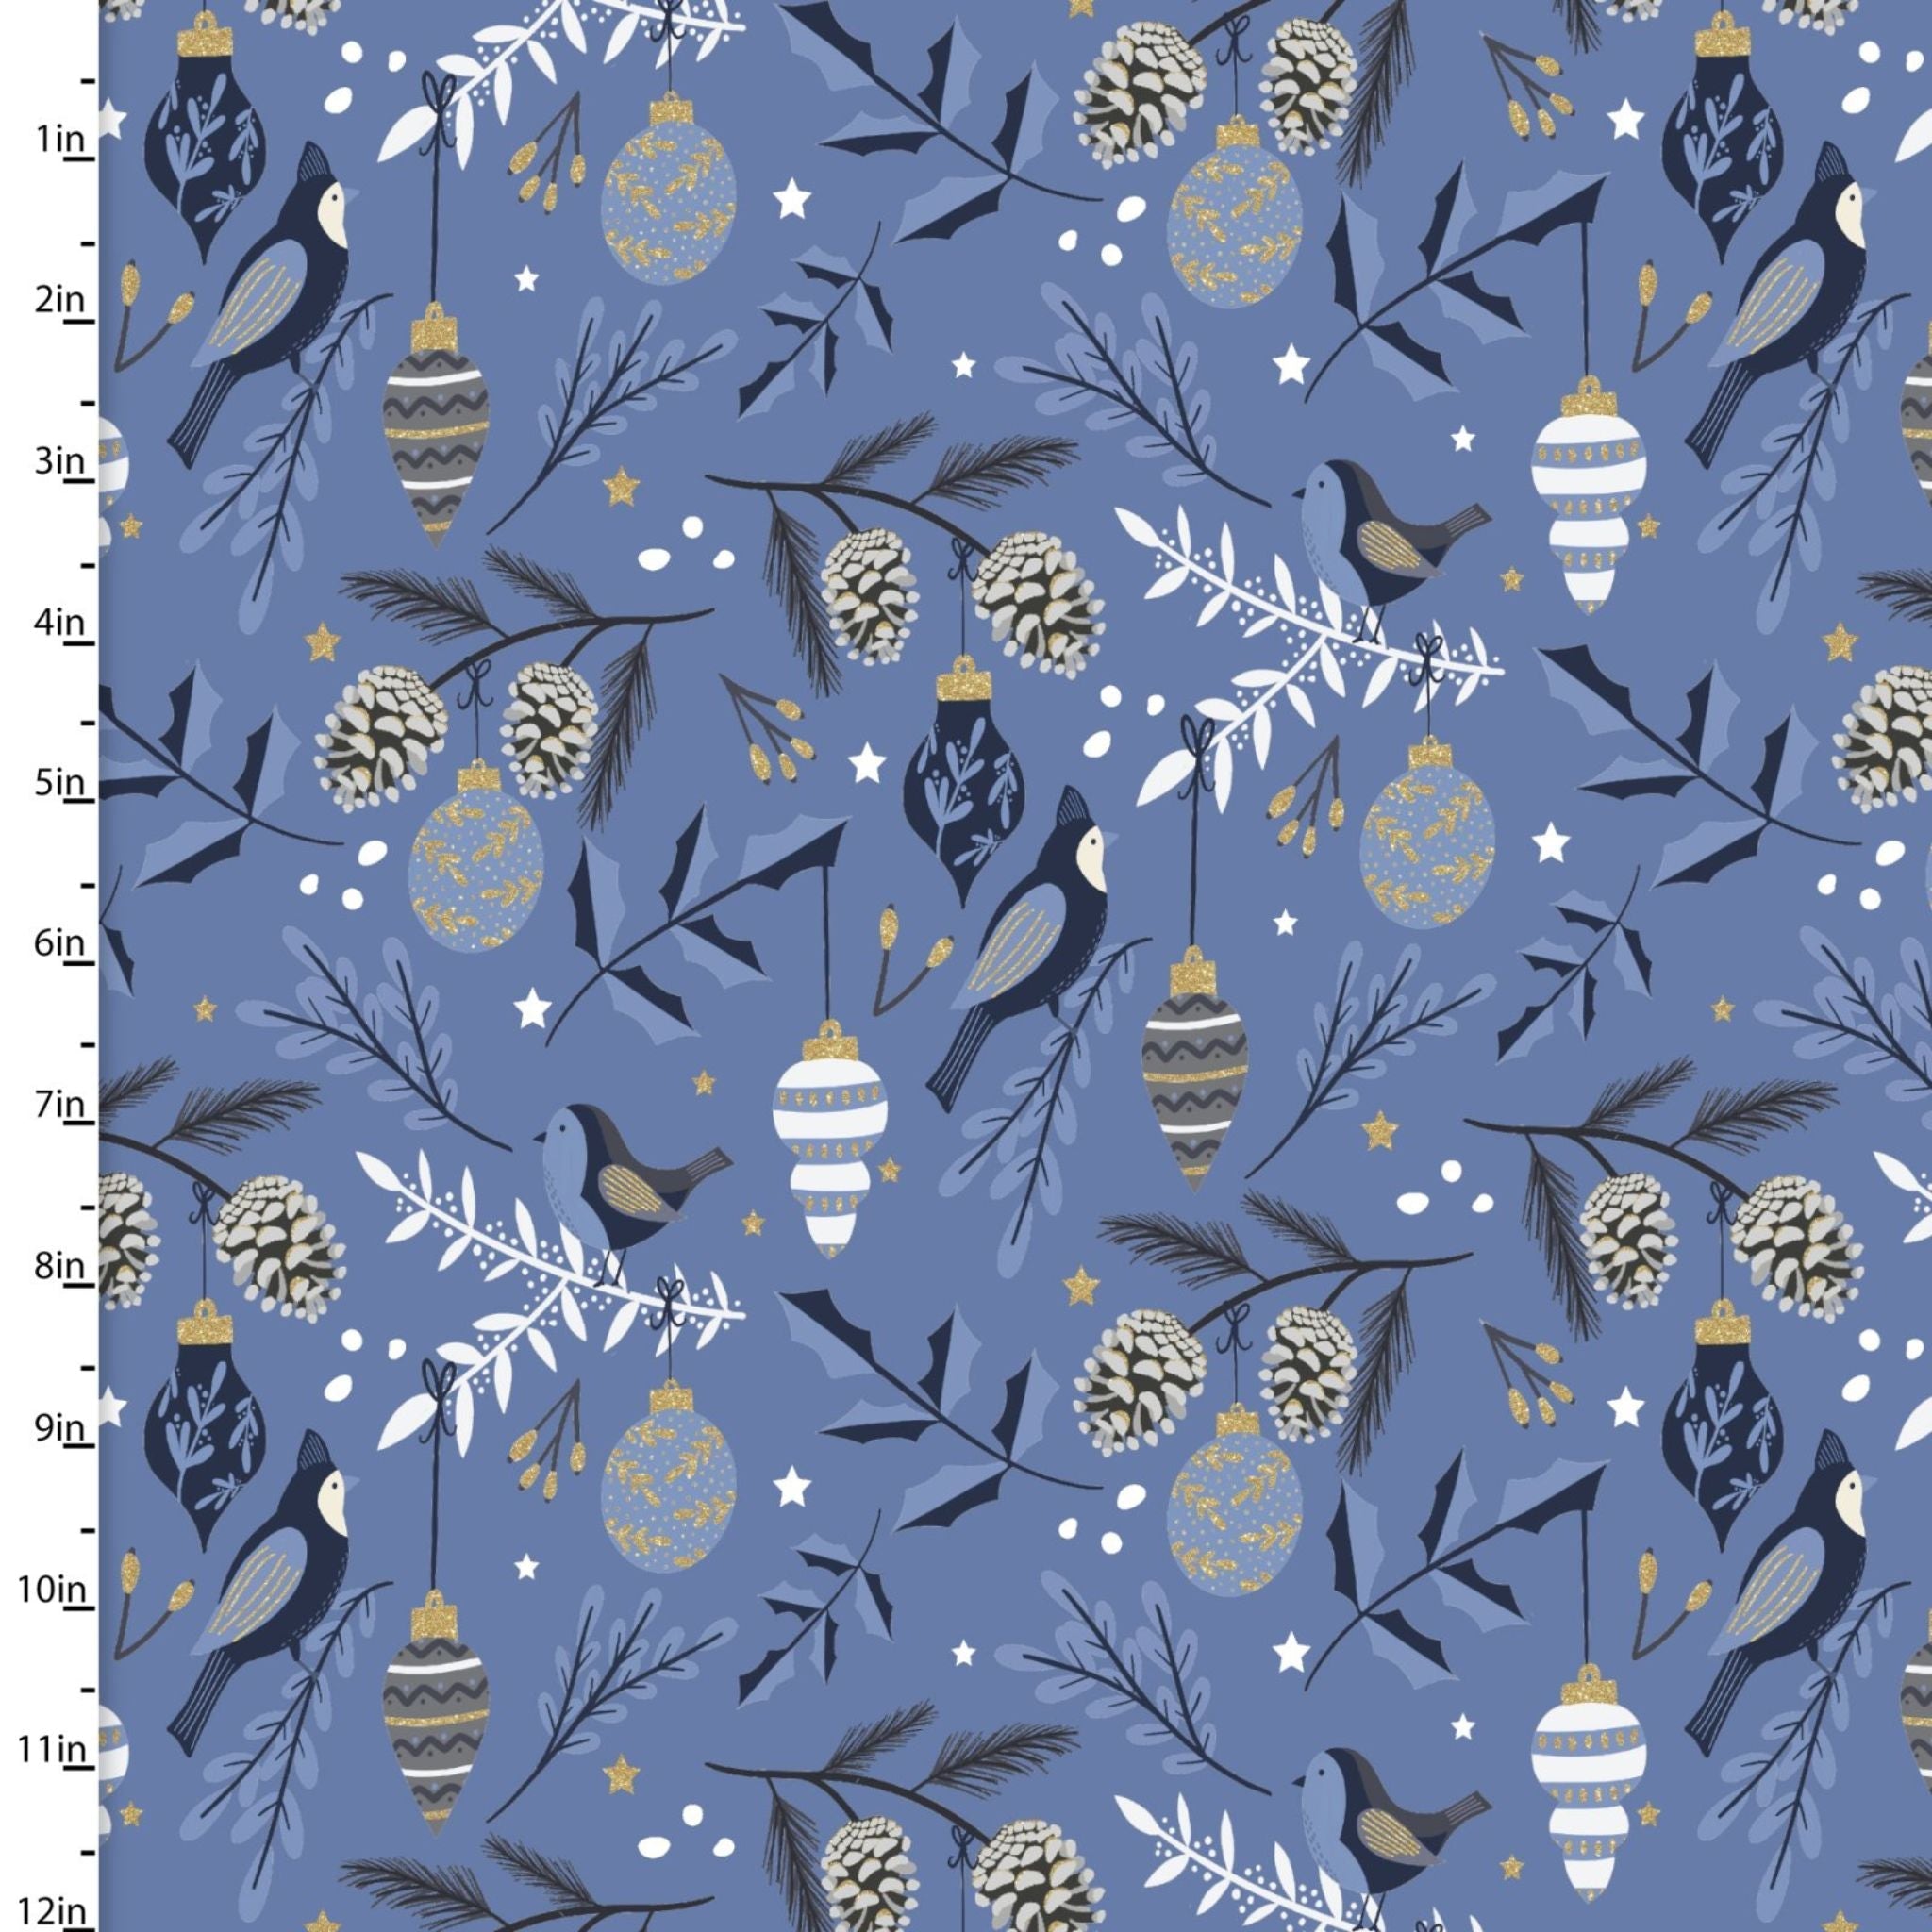 Christmas birds in the trees with gold accented baubles on blue cotton fabric - Majestic Winder by 3 Wishes